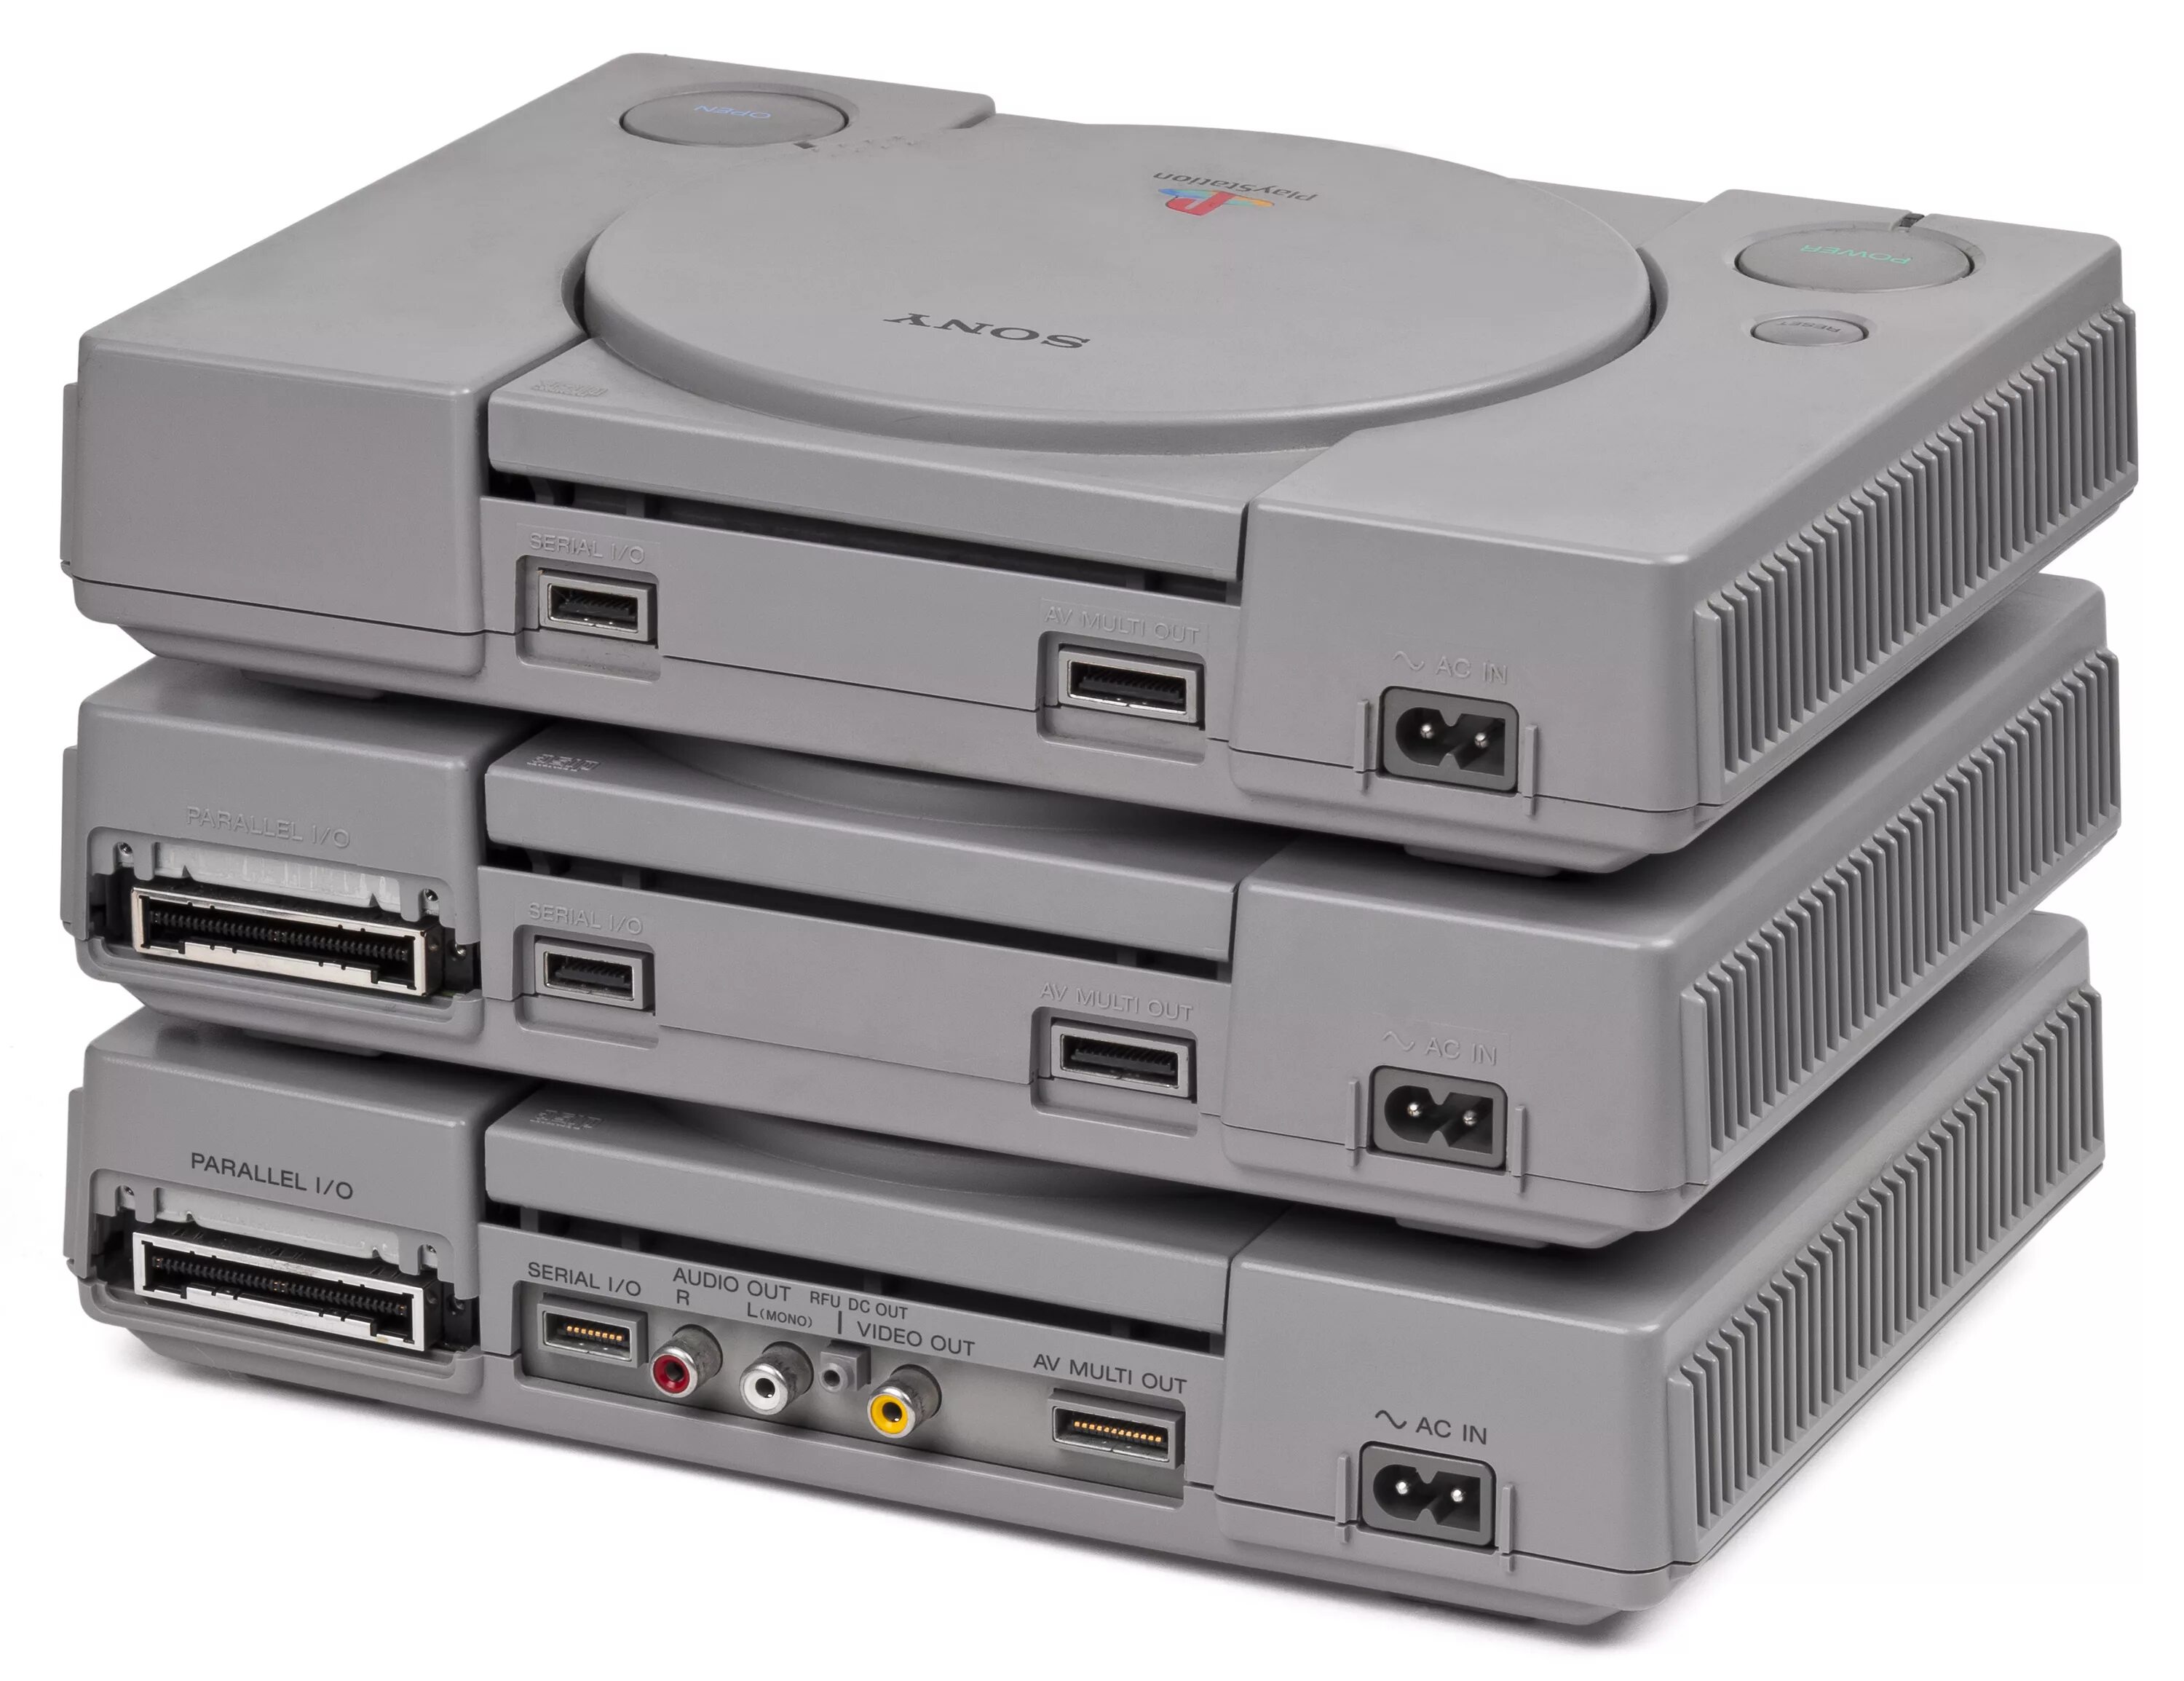 Sony PLAYSTATION 1. Sony PLAYSTATION ps1. Ps1 SCPH 5903. Sony PSX PLAYSTATION 1.